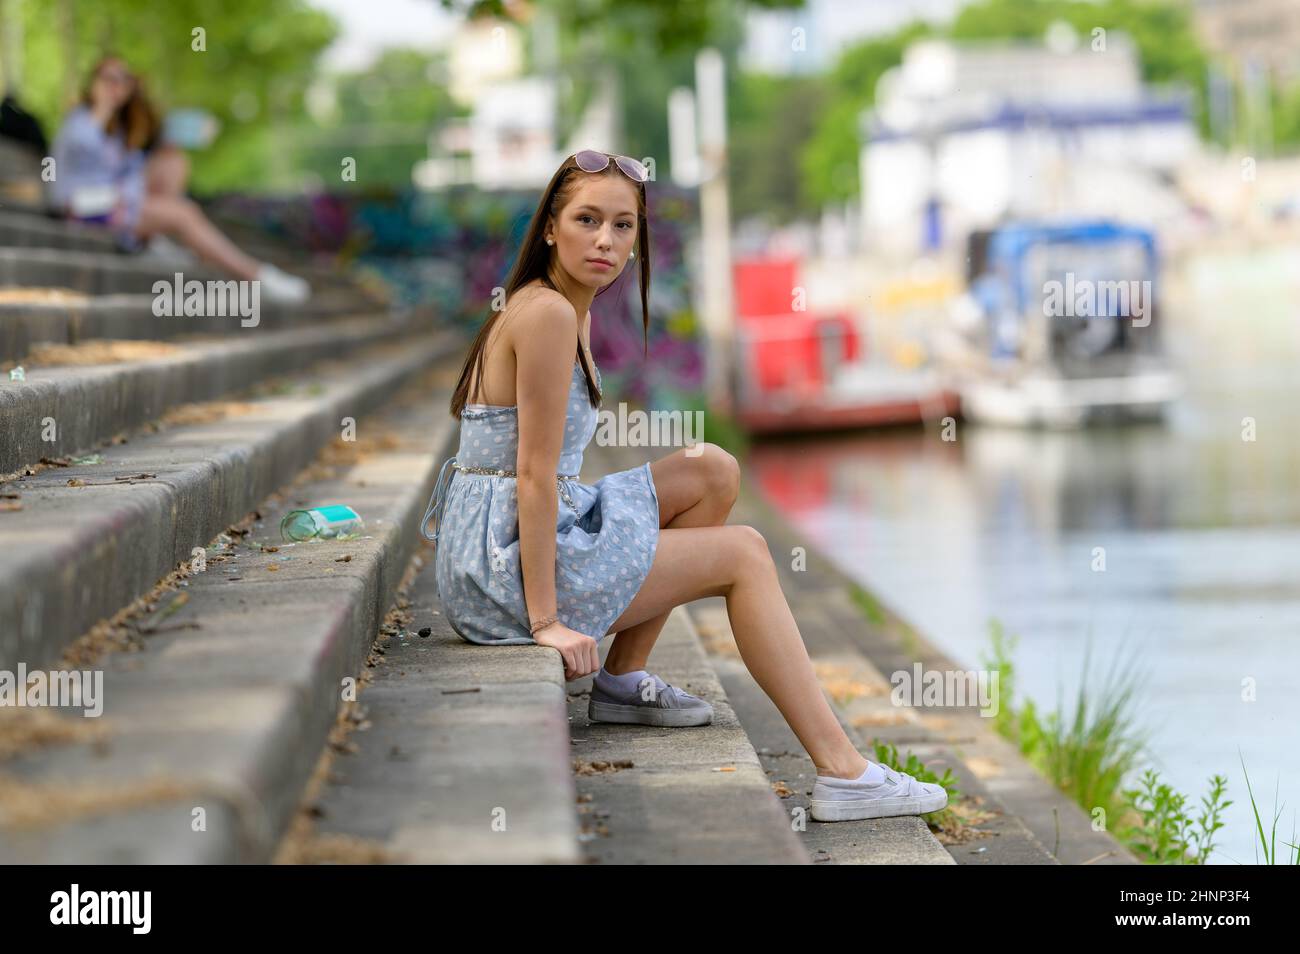 Young woman 3 mini Alamy - and - hi-res Page photography in stock images dress